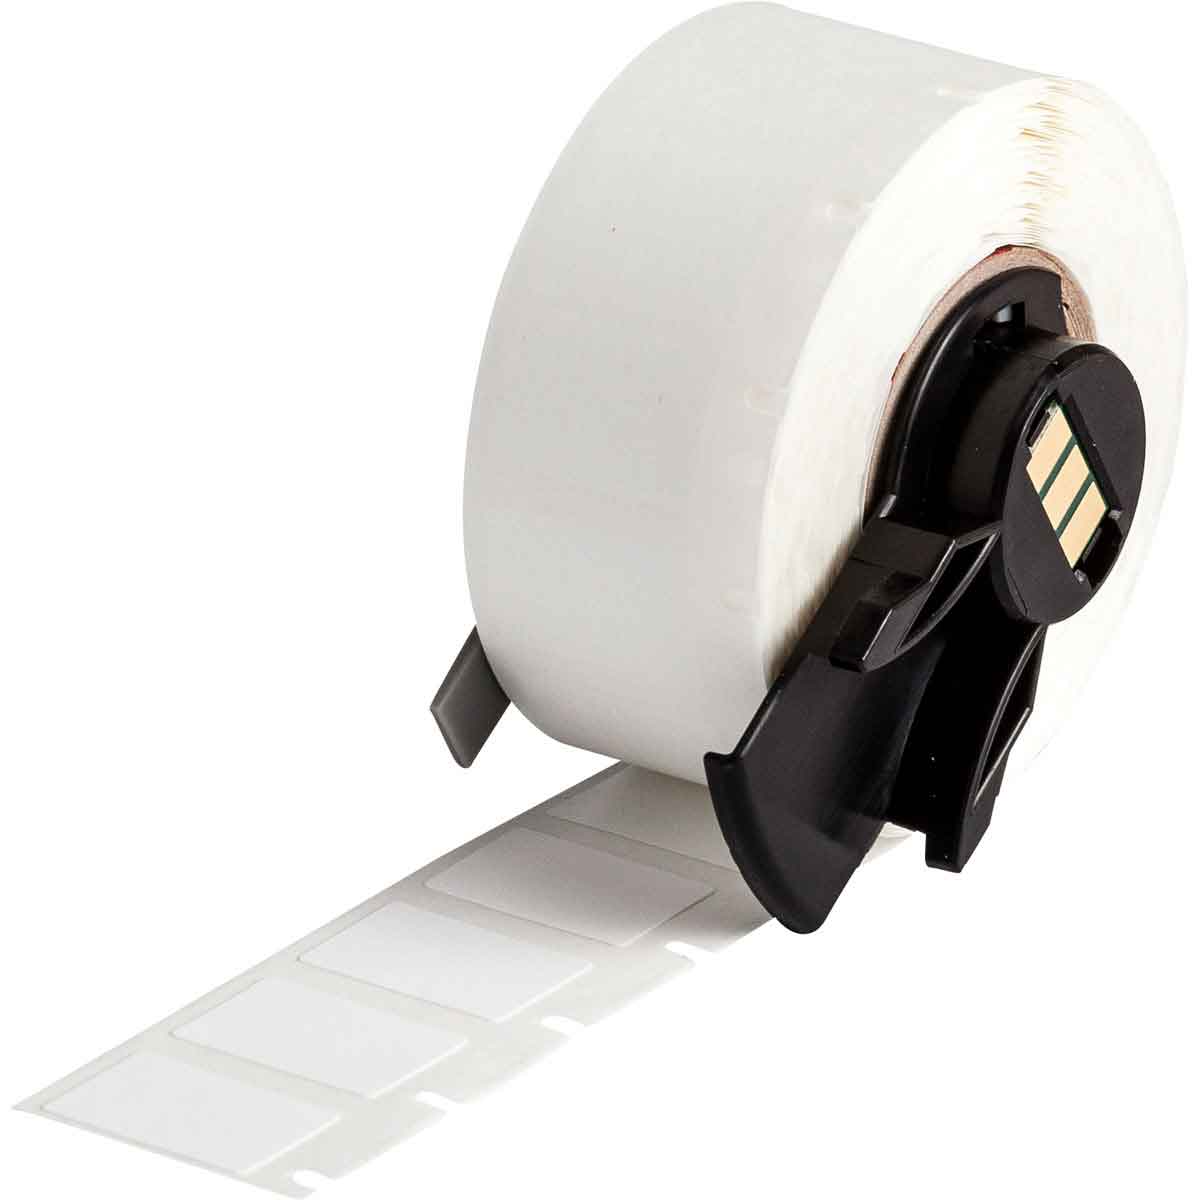 500 per Roll B-499 Nylon Cloth Matte Finish White Label Brady PTL-117-499 TLS 2200 and TLS PC Link 0.900 with 0.500 Diameter vial top label Width x 0.5 Height 